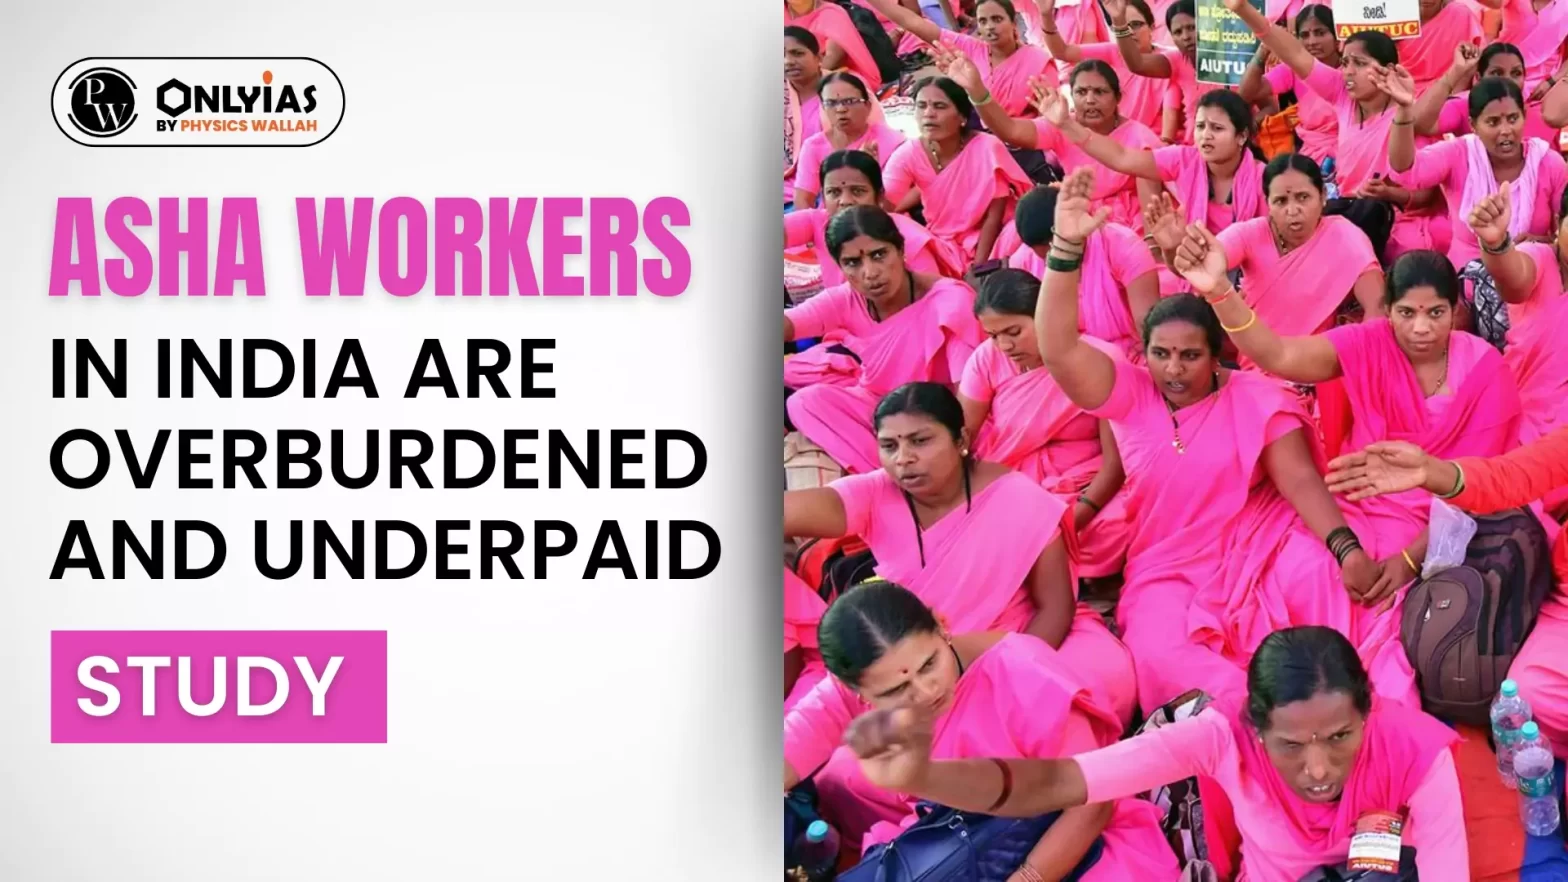 ASHA Workers in India are Overburdened and Underpaid: Study